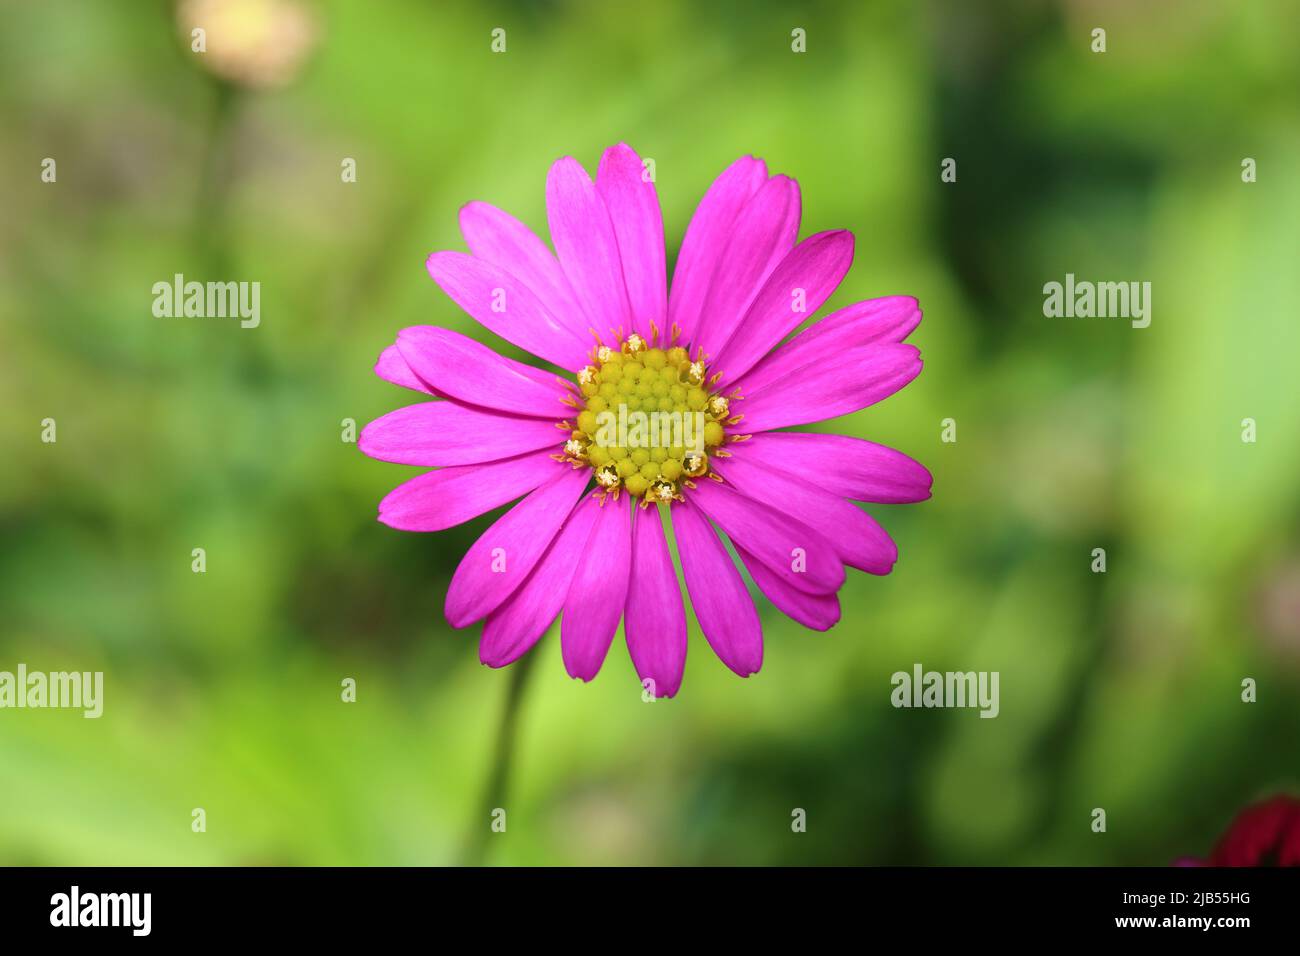 close-up of a pink brachyscome multifida flower against a green blurry background, copy space Stock Photo